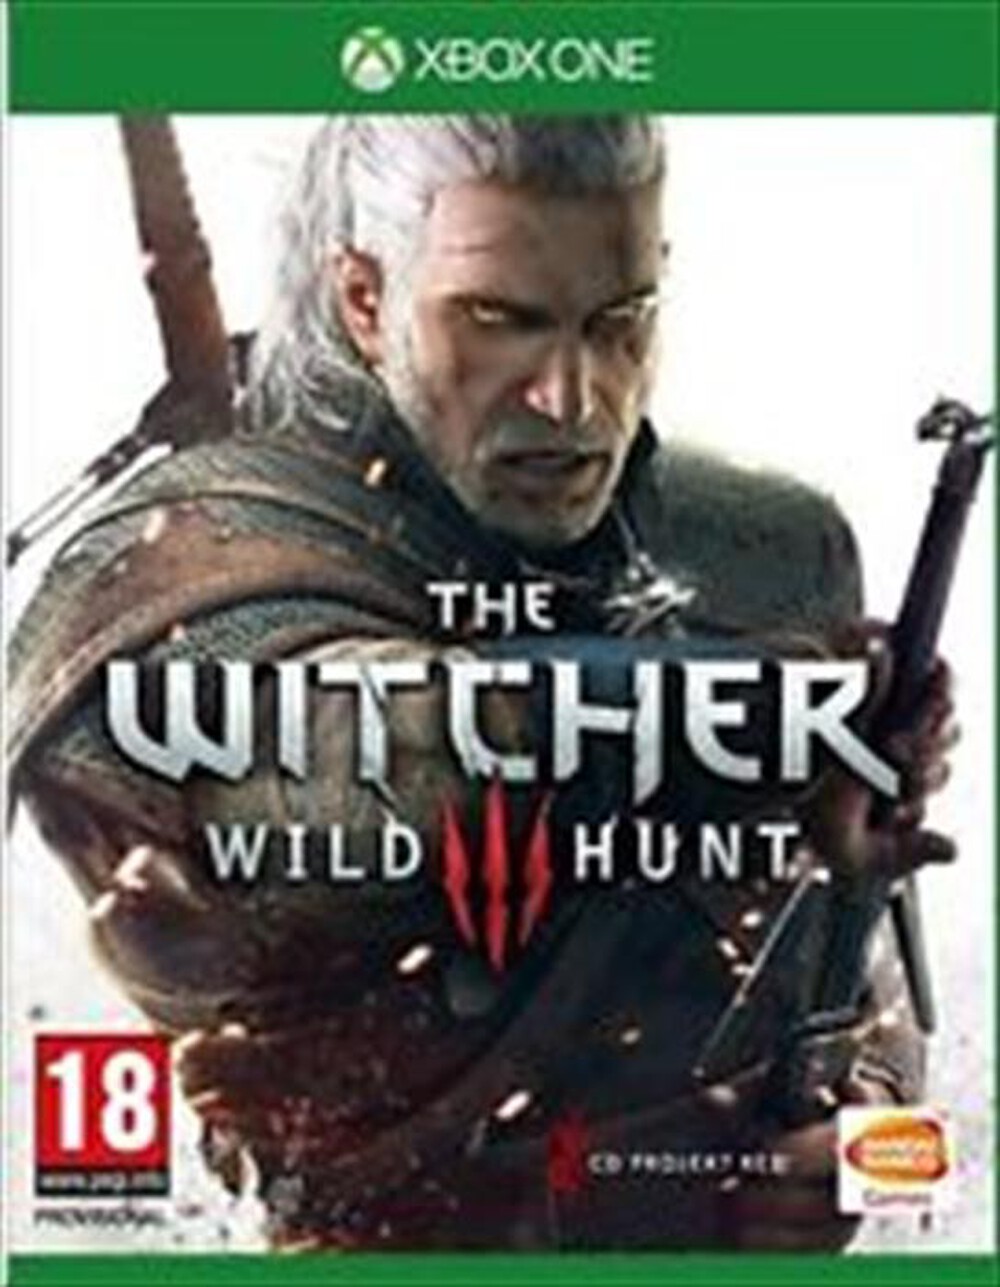 "NAMCO - The Witcher 3: The Wild Hunt (Reorder) Xbox One"